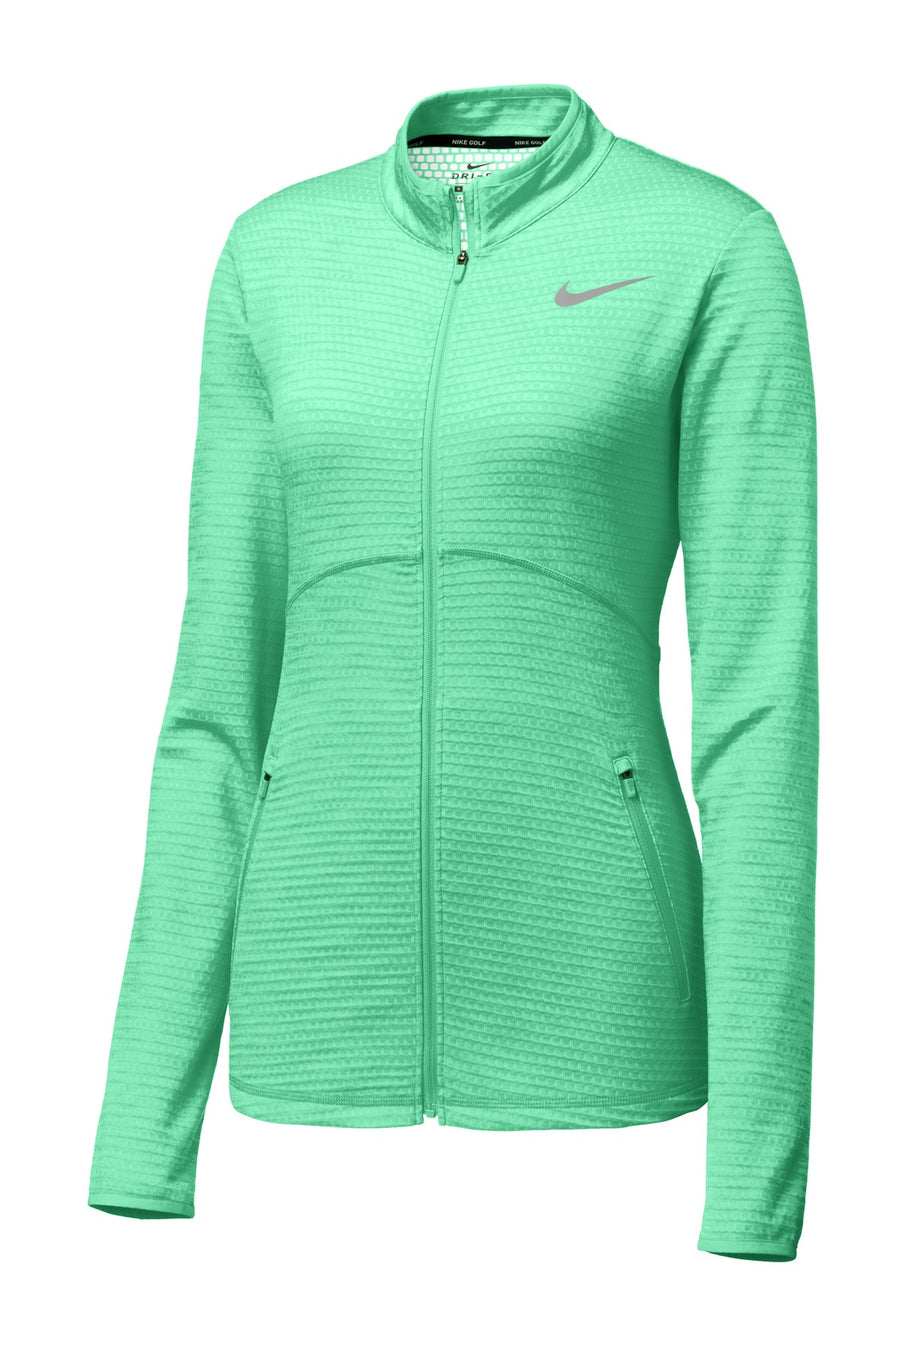 Limited Edition Nike Full-Zip Cover-Up.